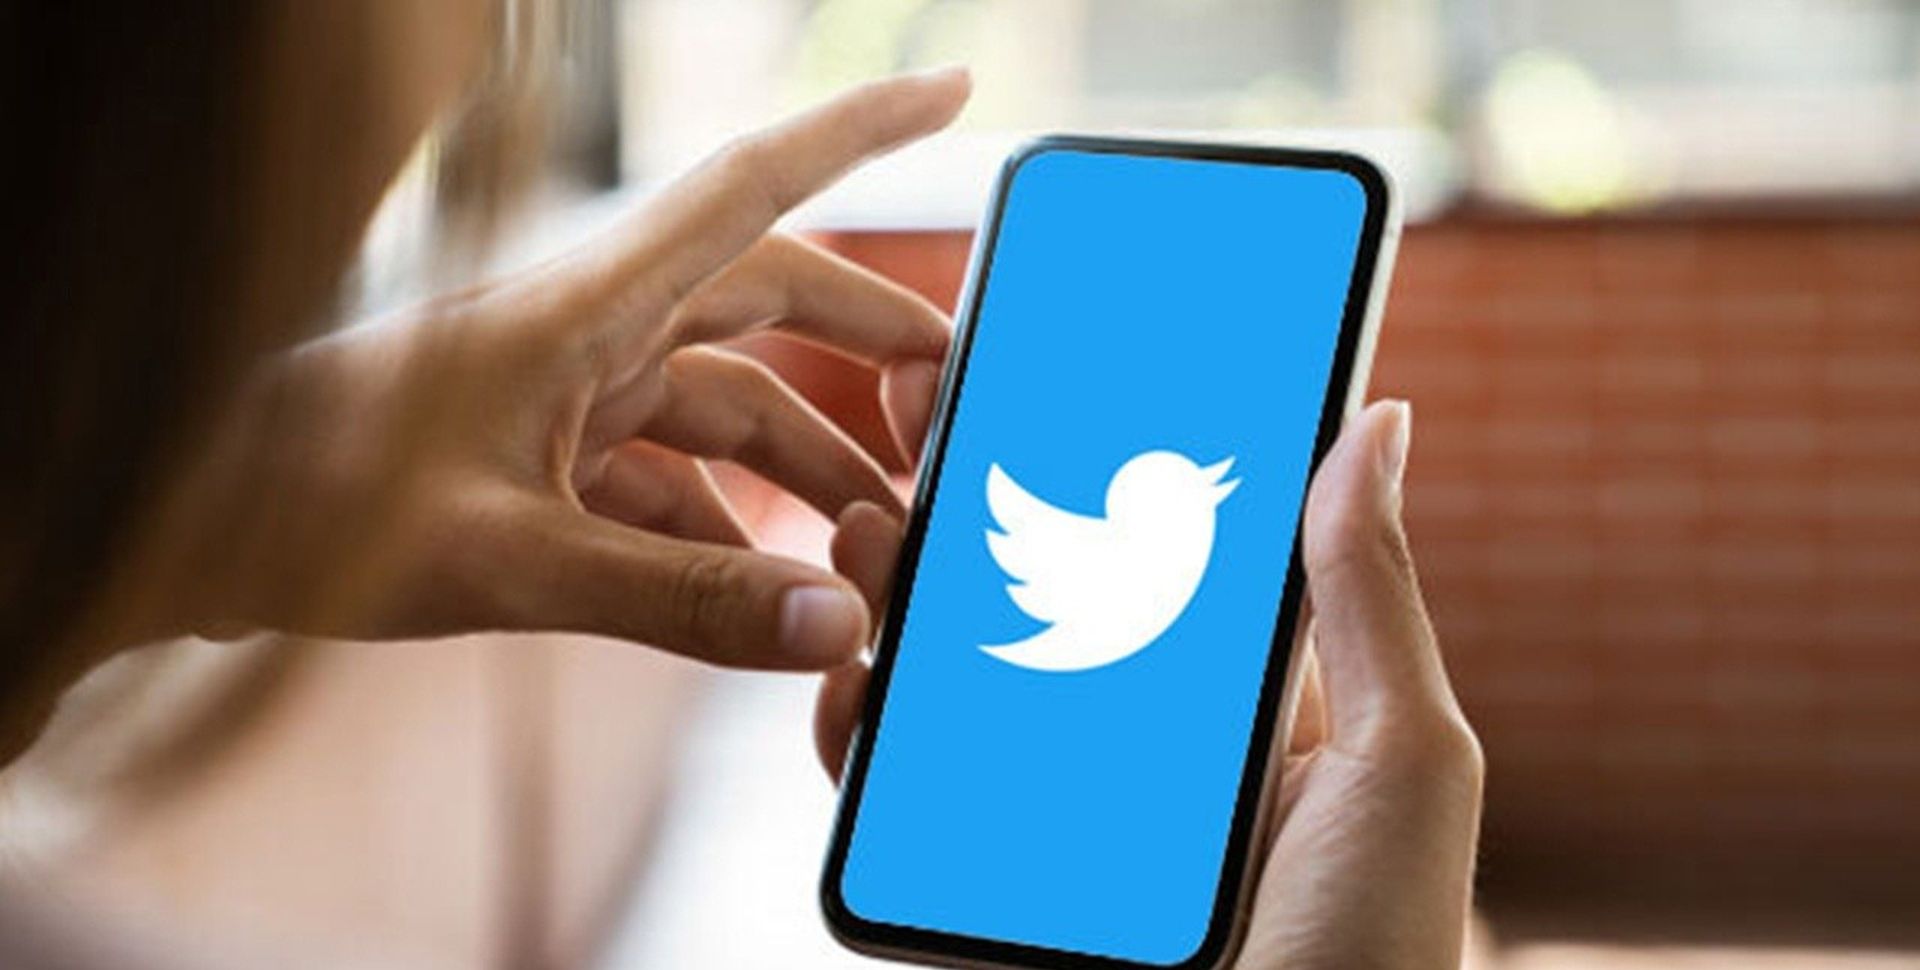 Today, we are going to be covering how to get verified on Twitter and will be explaining Twitter Blue so you can understand all there is about the subscription.